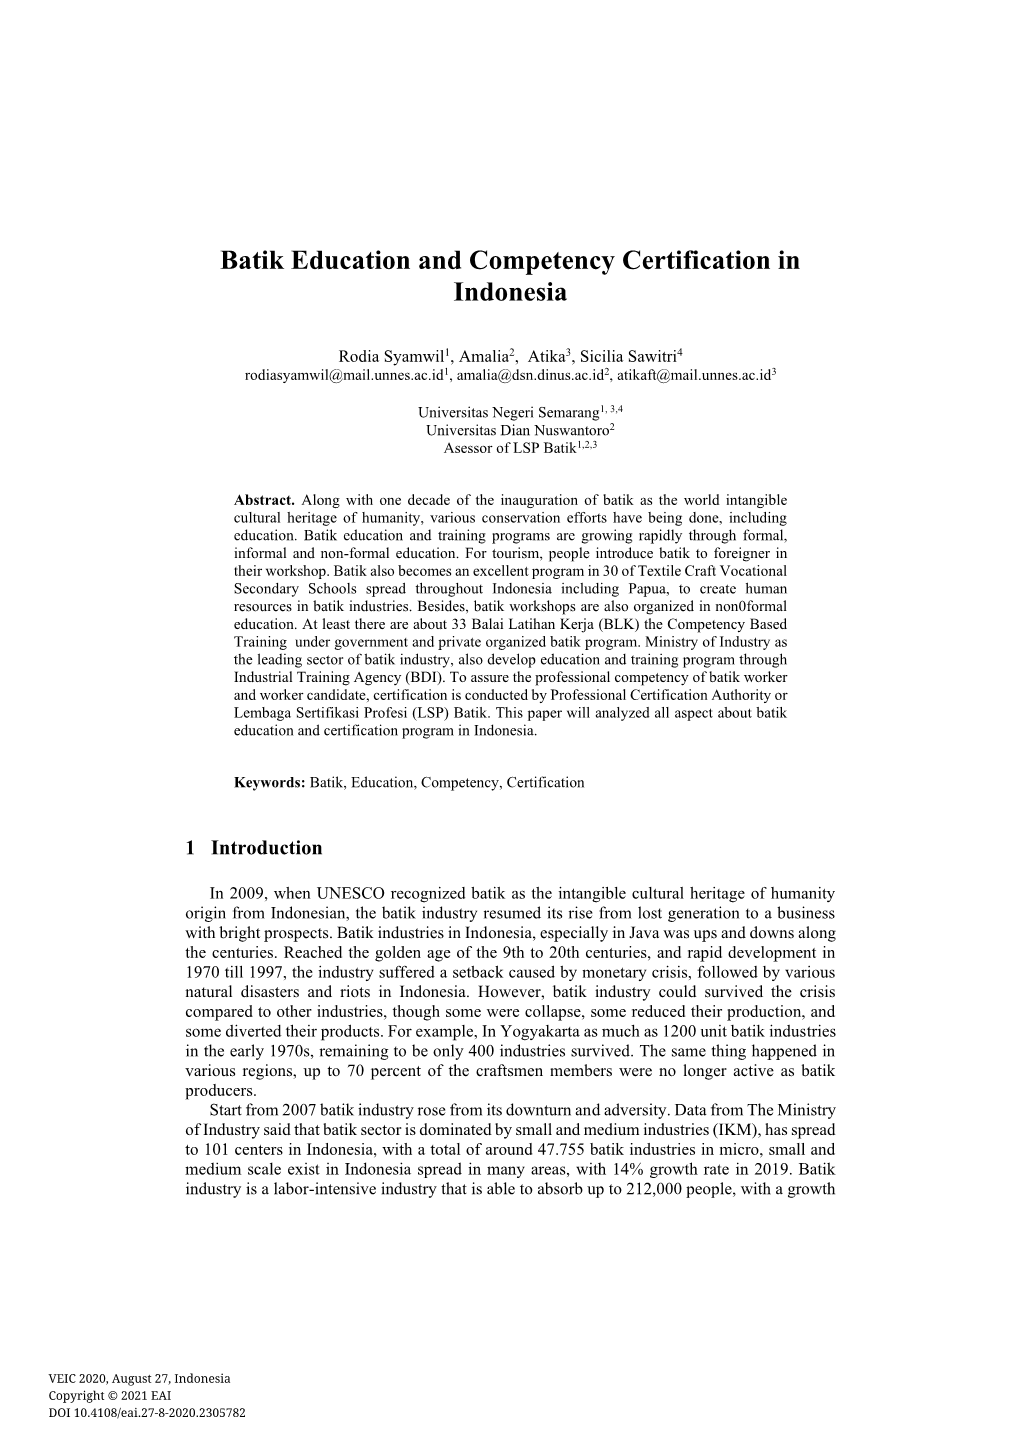 Batik Education and Competency Certification in Indonesia